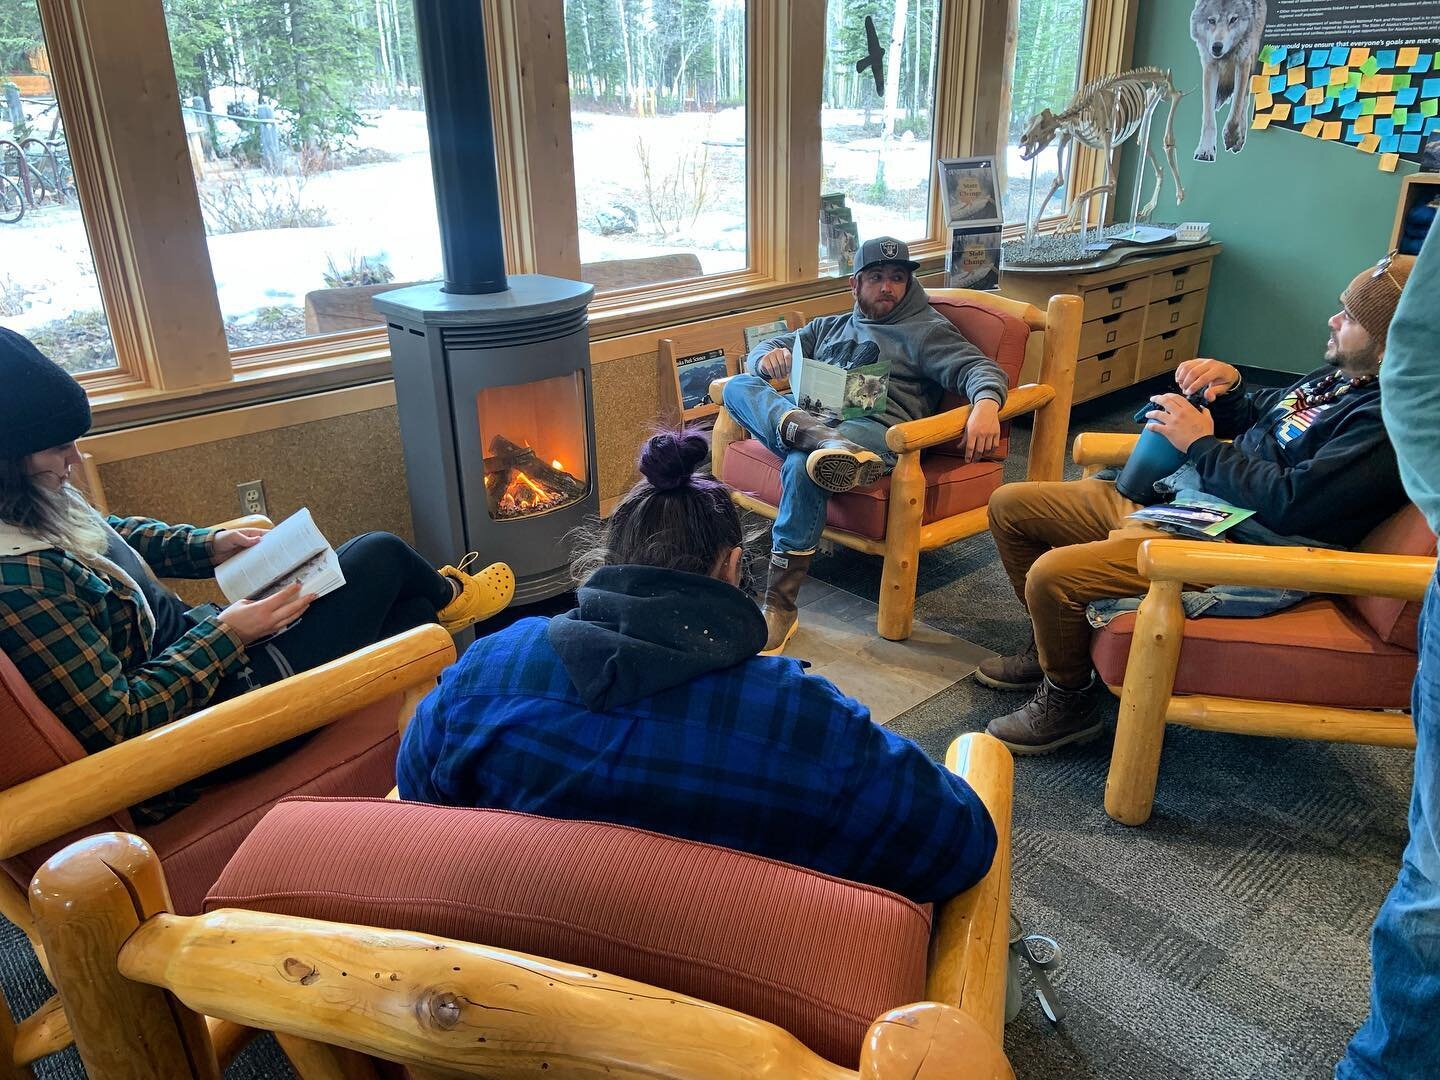 We got the crew into the park today to start beefing up on their Denali info. They found a warm spot by the fire to sit and learn a little before our end of day presentations.